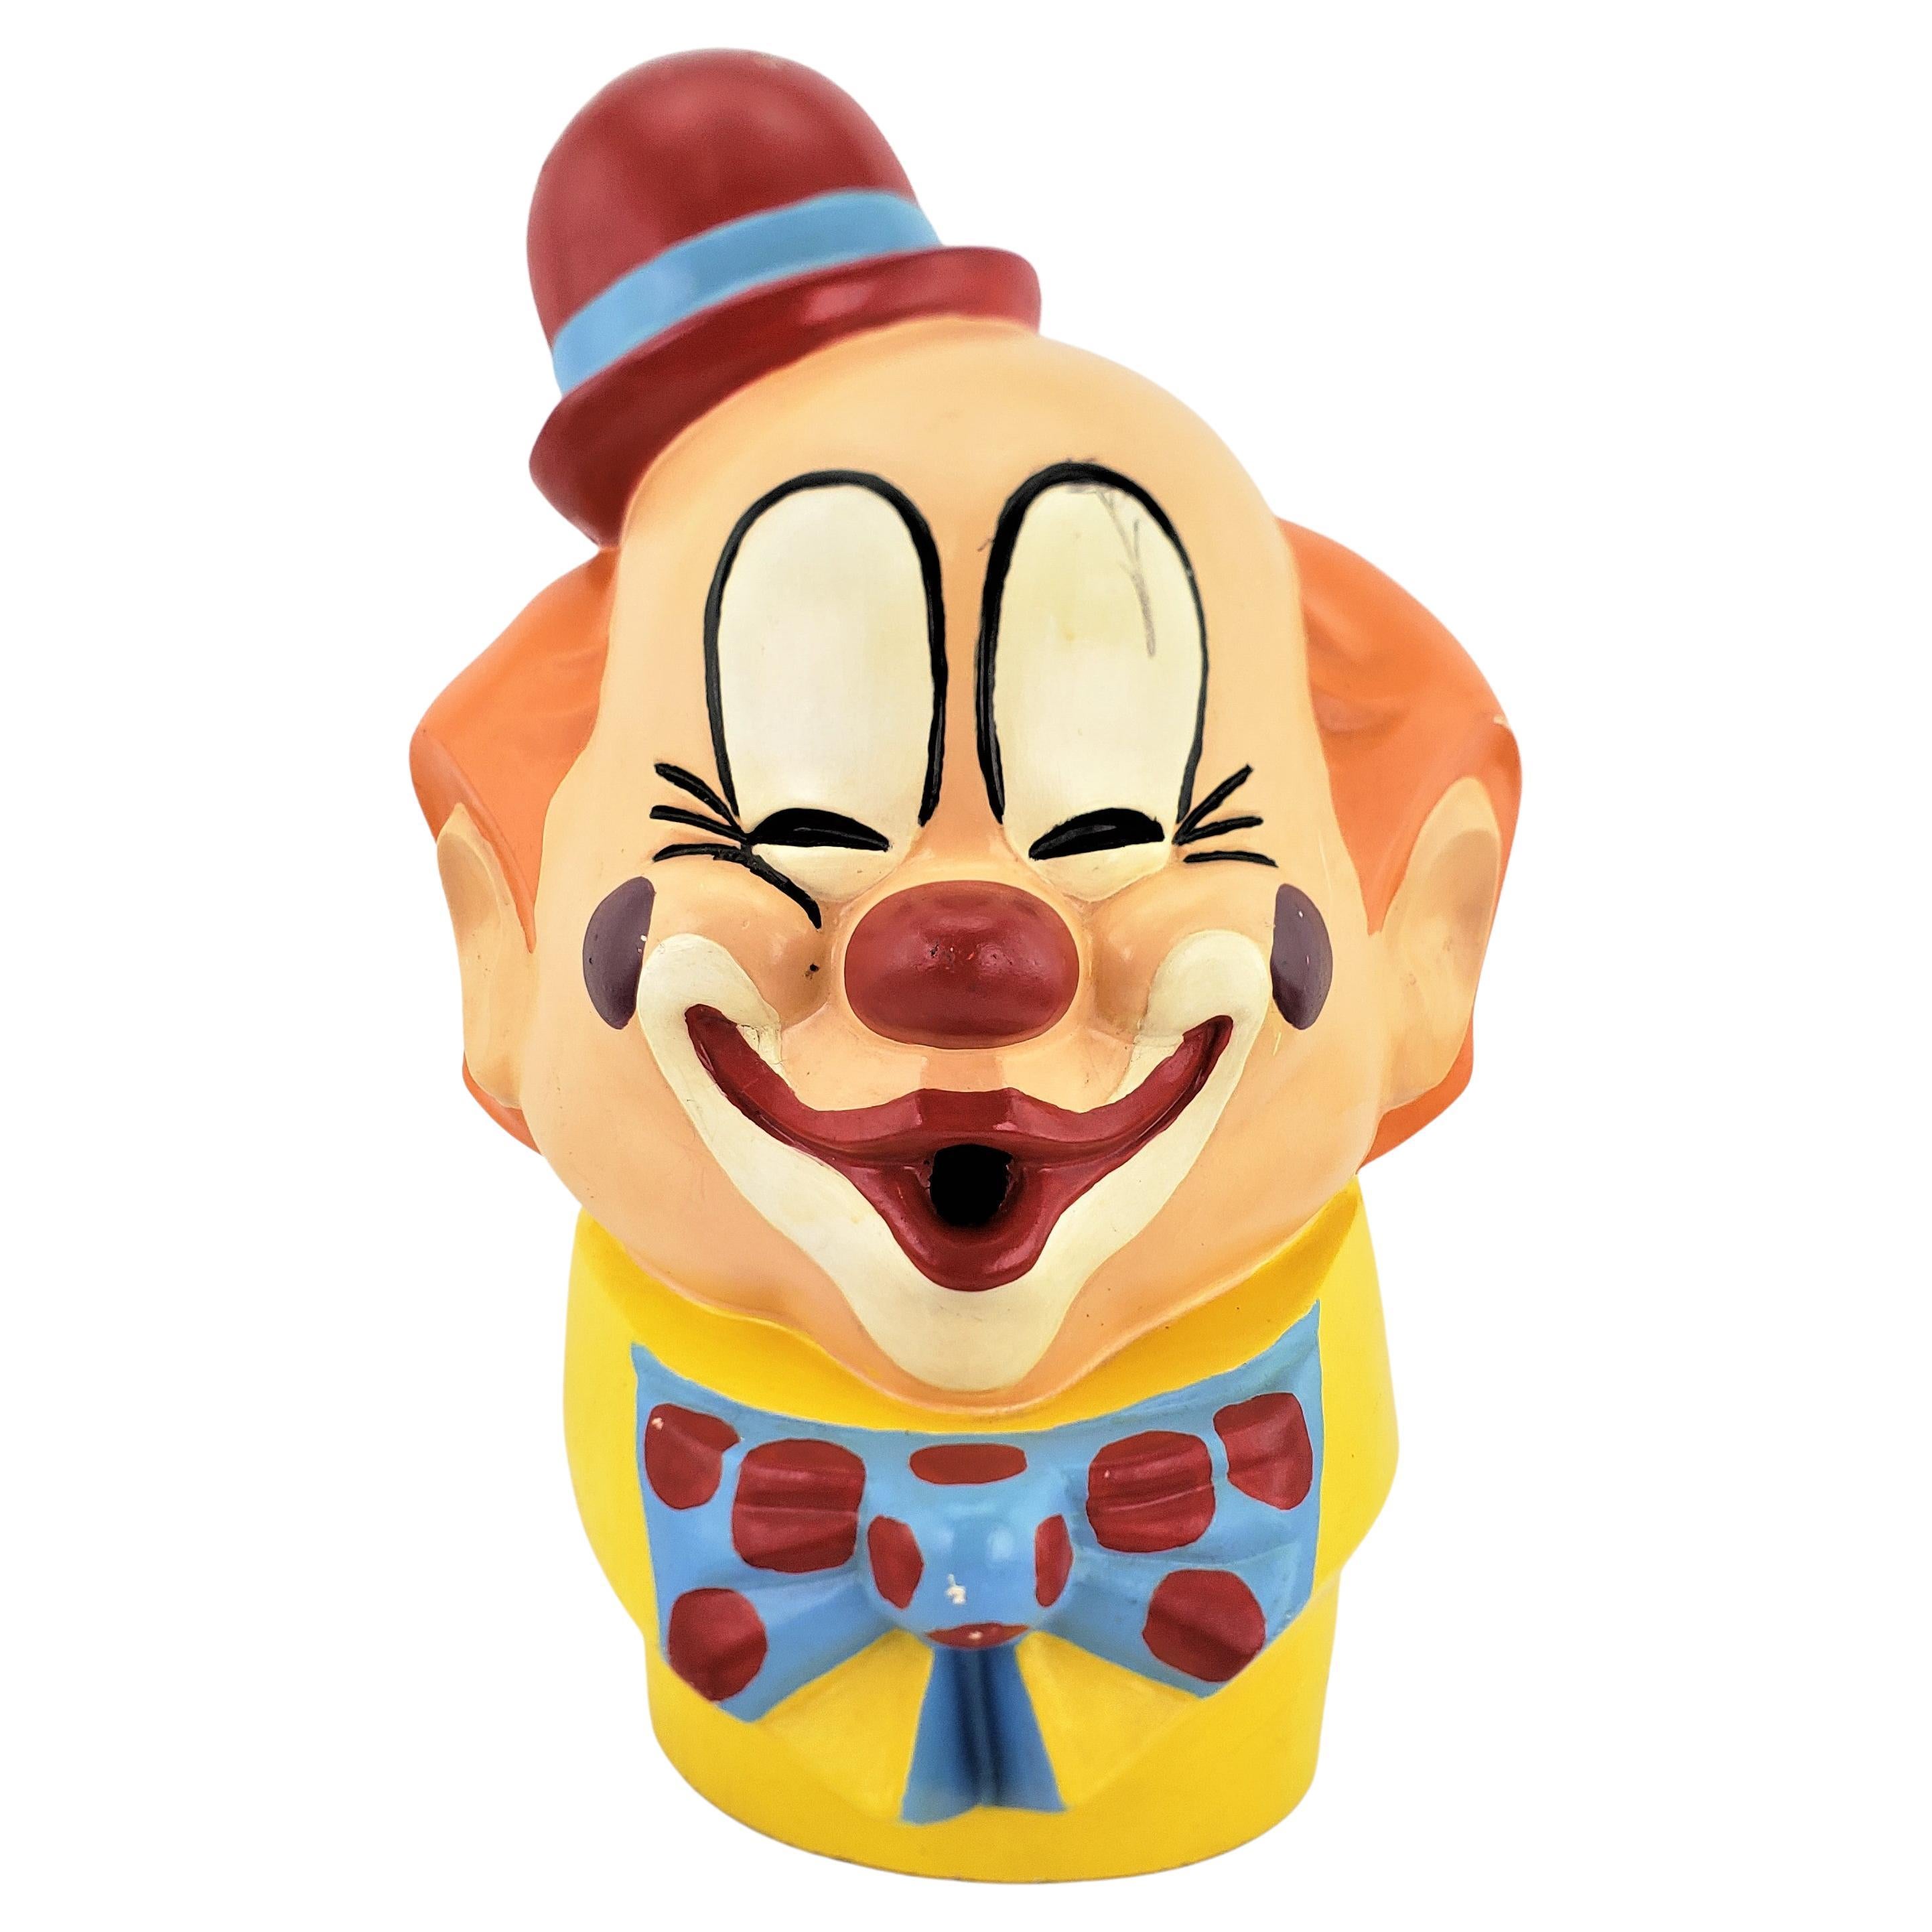 Mid-Century Era Molded Fiberglass Carnival Clown Head or Midway Game Component